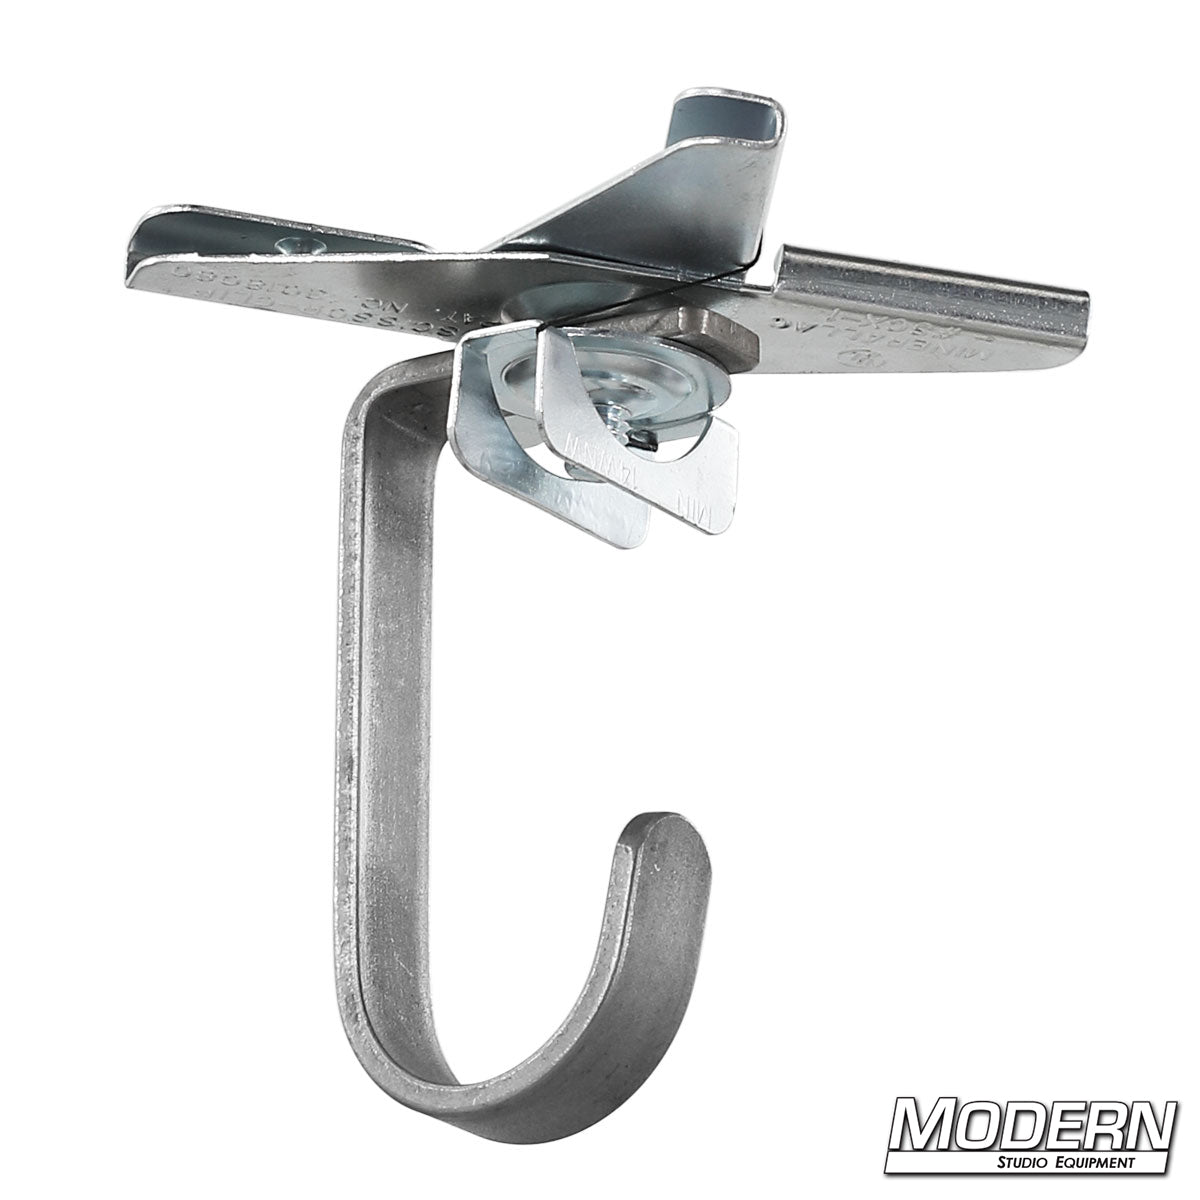 Drop Ceiling Scissor Clamp with Cable Hook – Modern Studio Equipment.